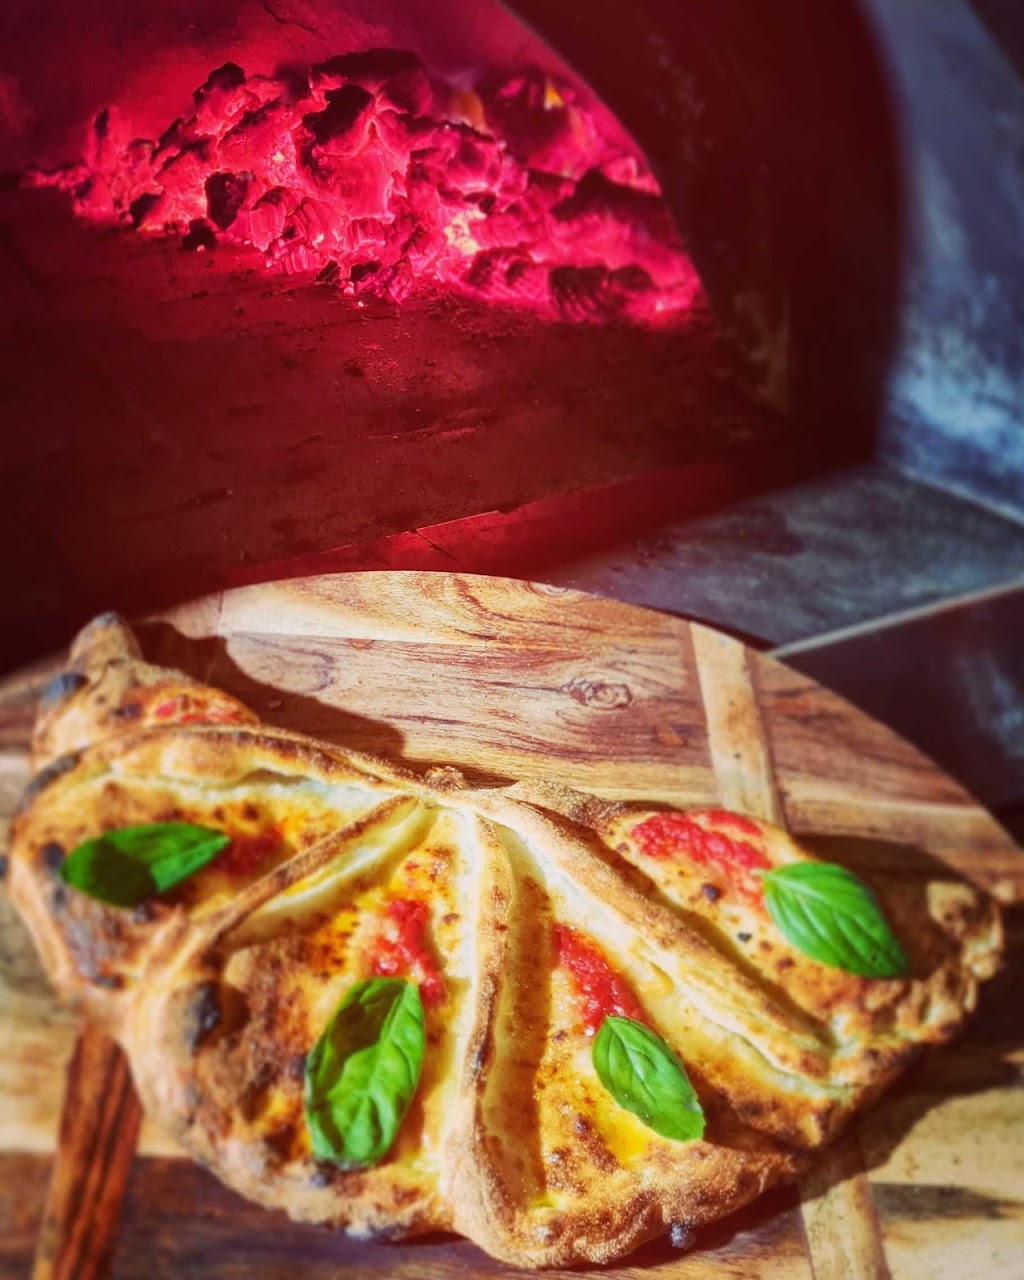 Calabrisella Woodfired Pizza | meal takeaway | 5A Hunter St, Callala Bay NSW 2540, Australia | 0404472093 OR +61 404 472 093